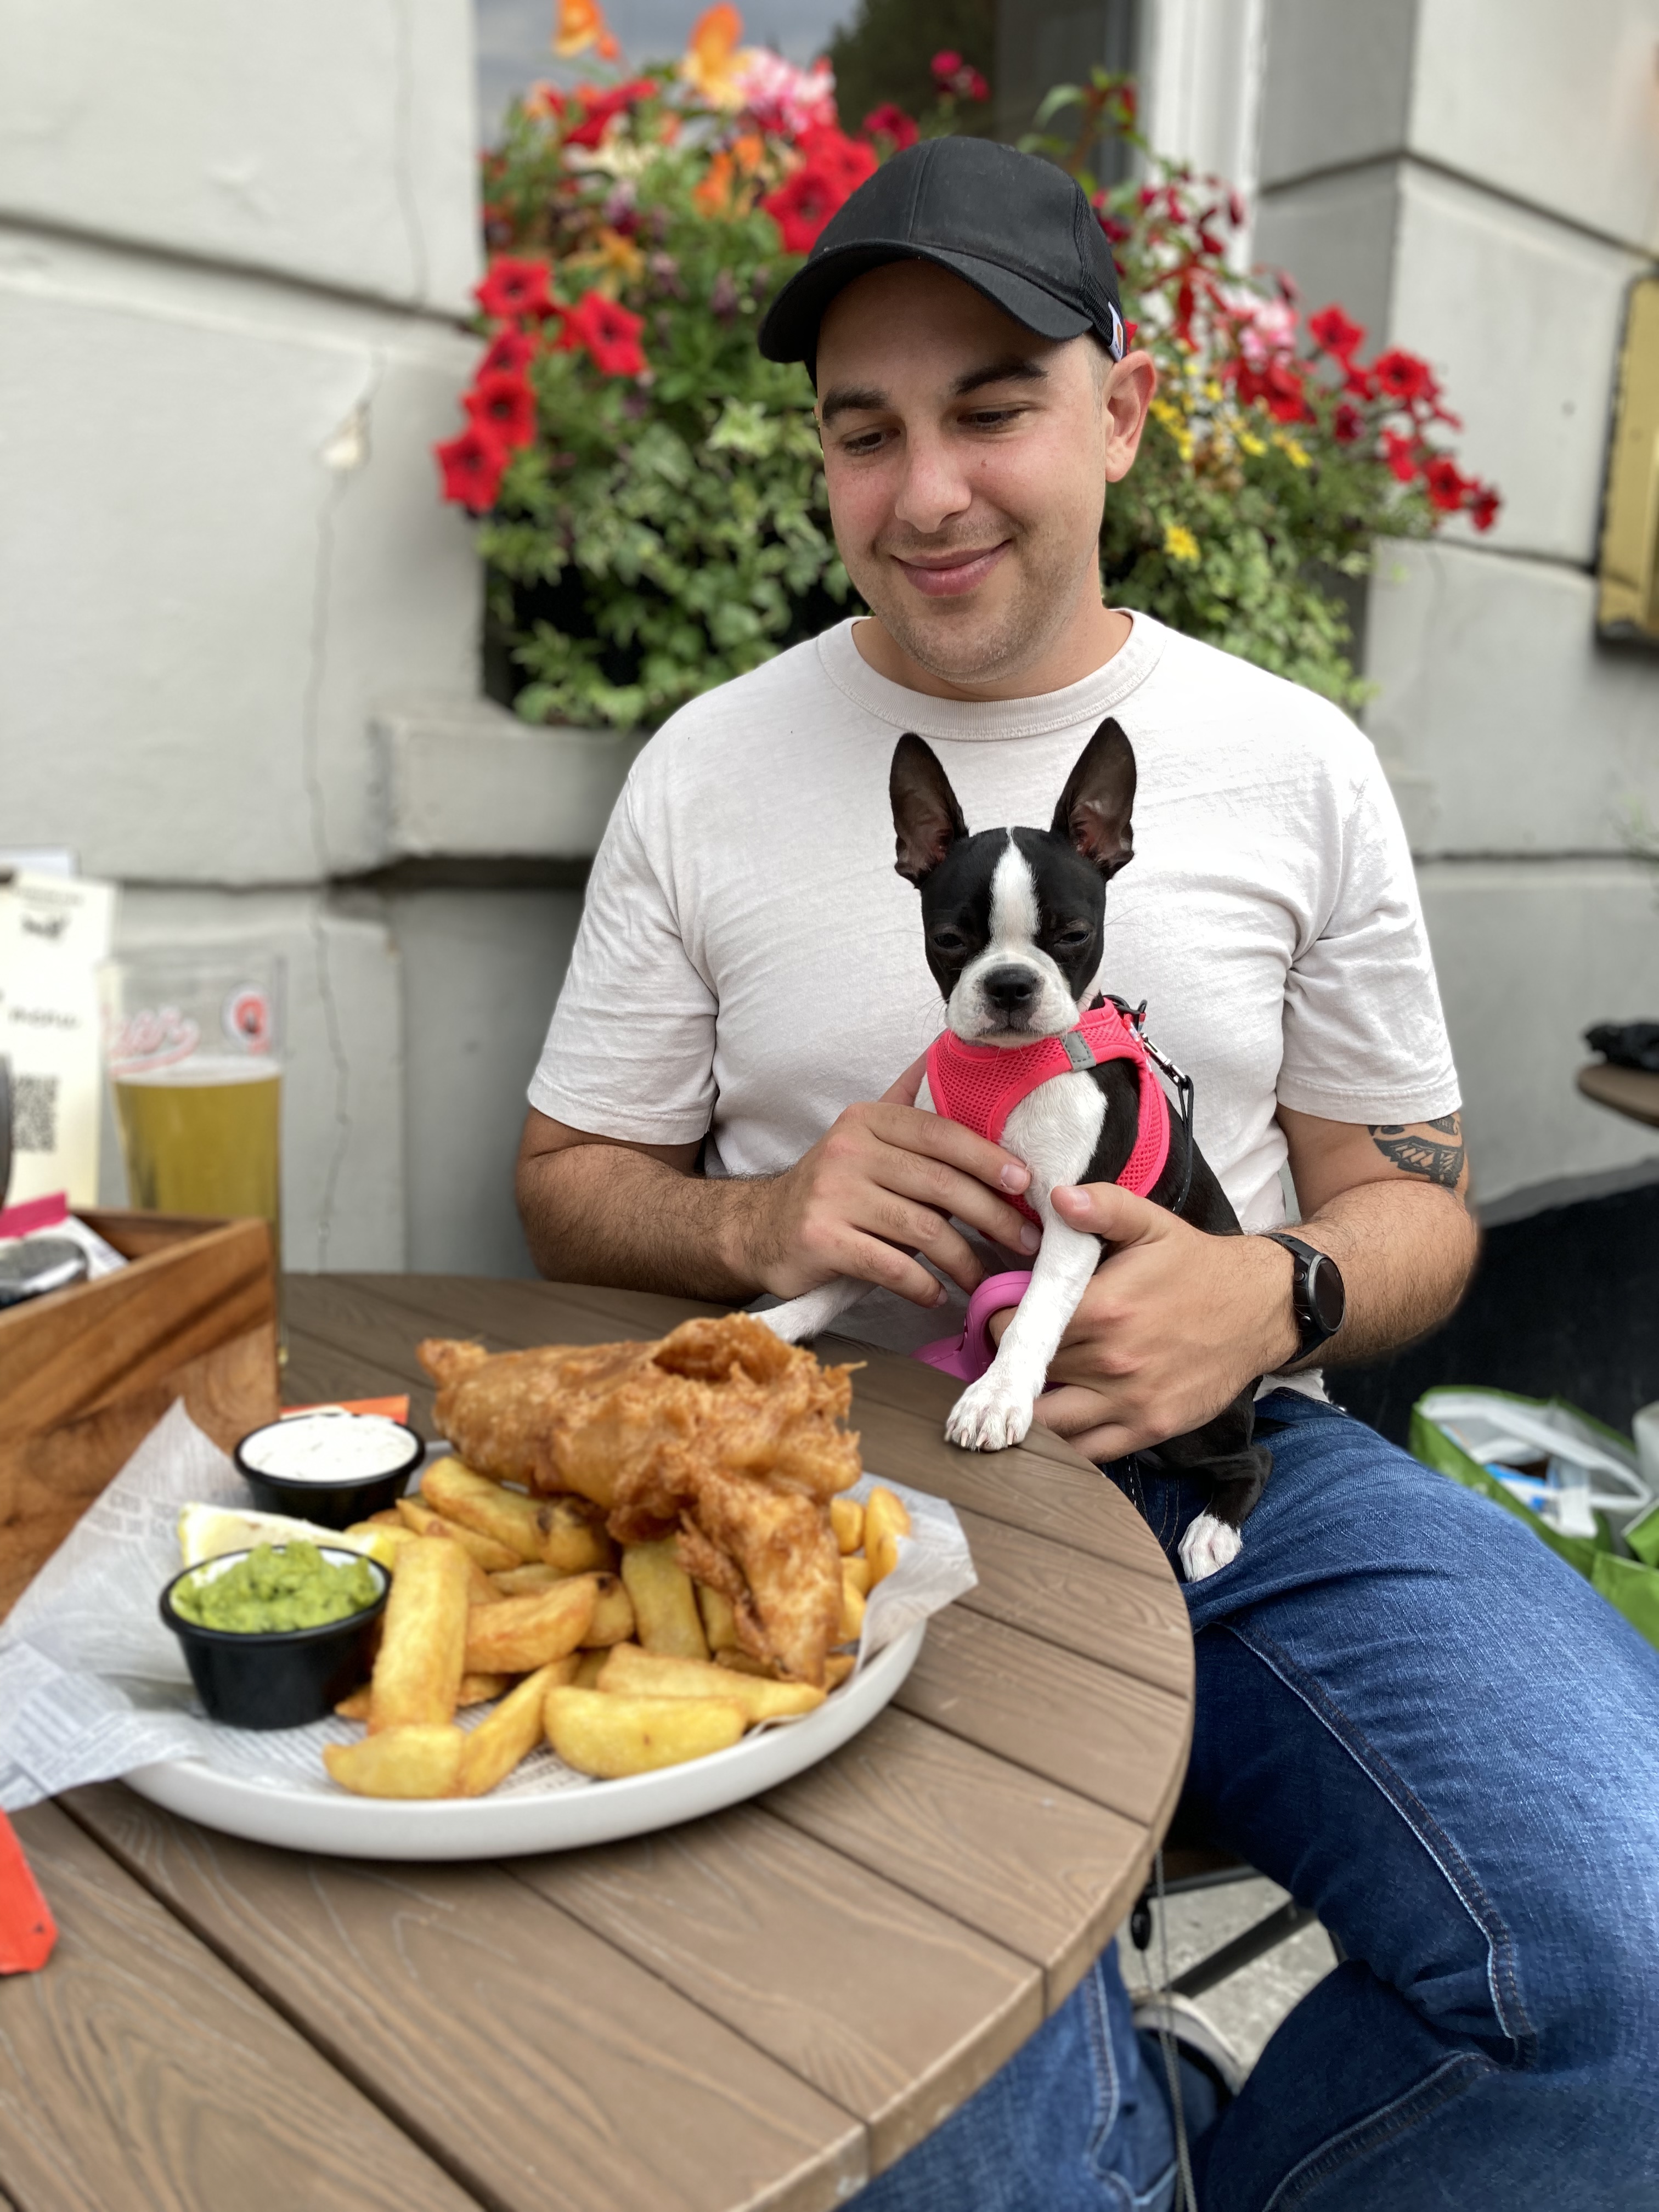 Me and my puppy eating fish and chips at a pub